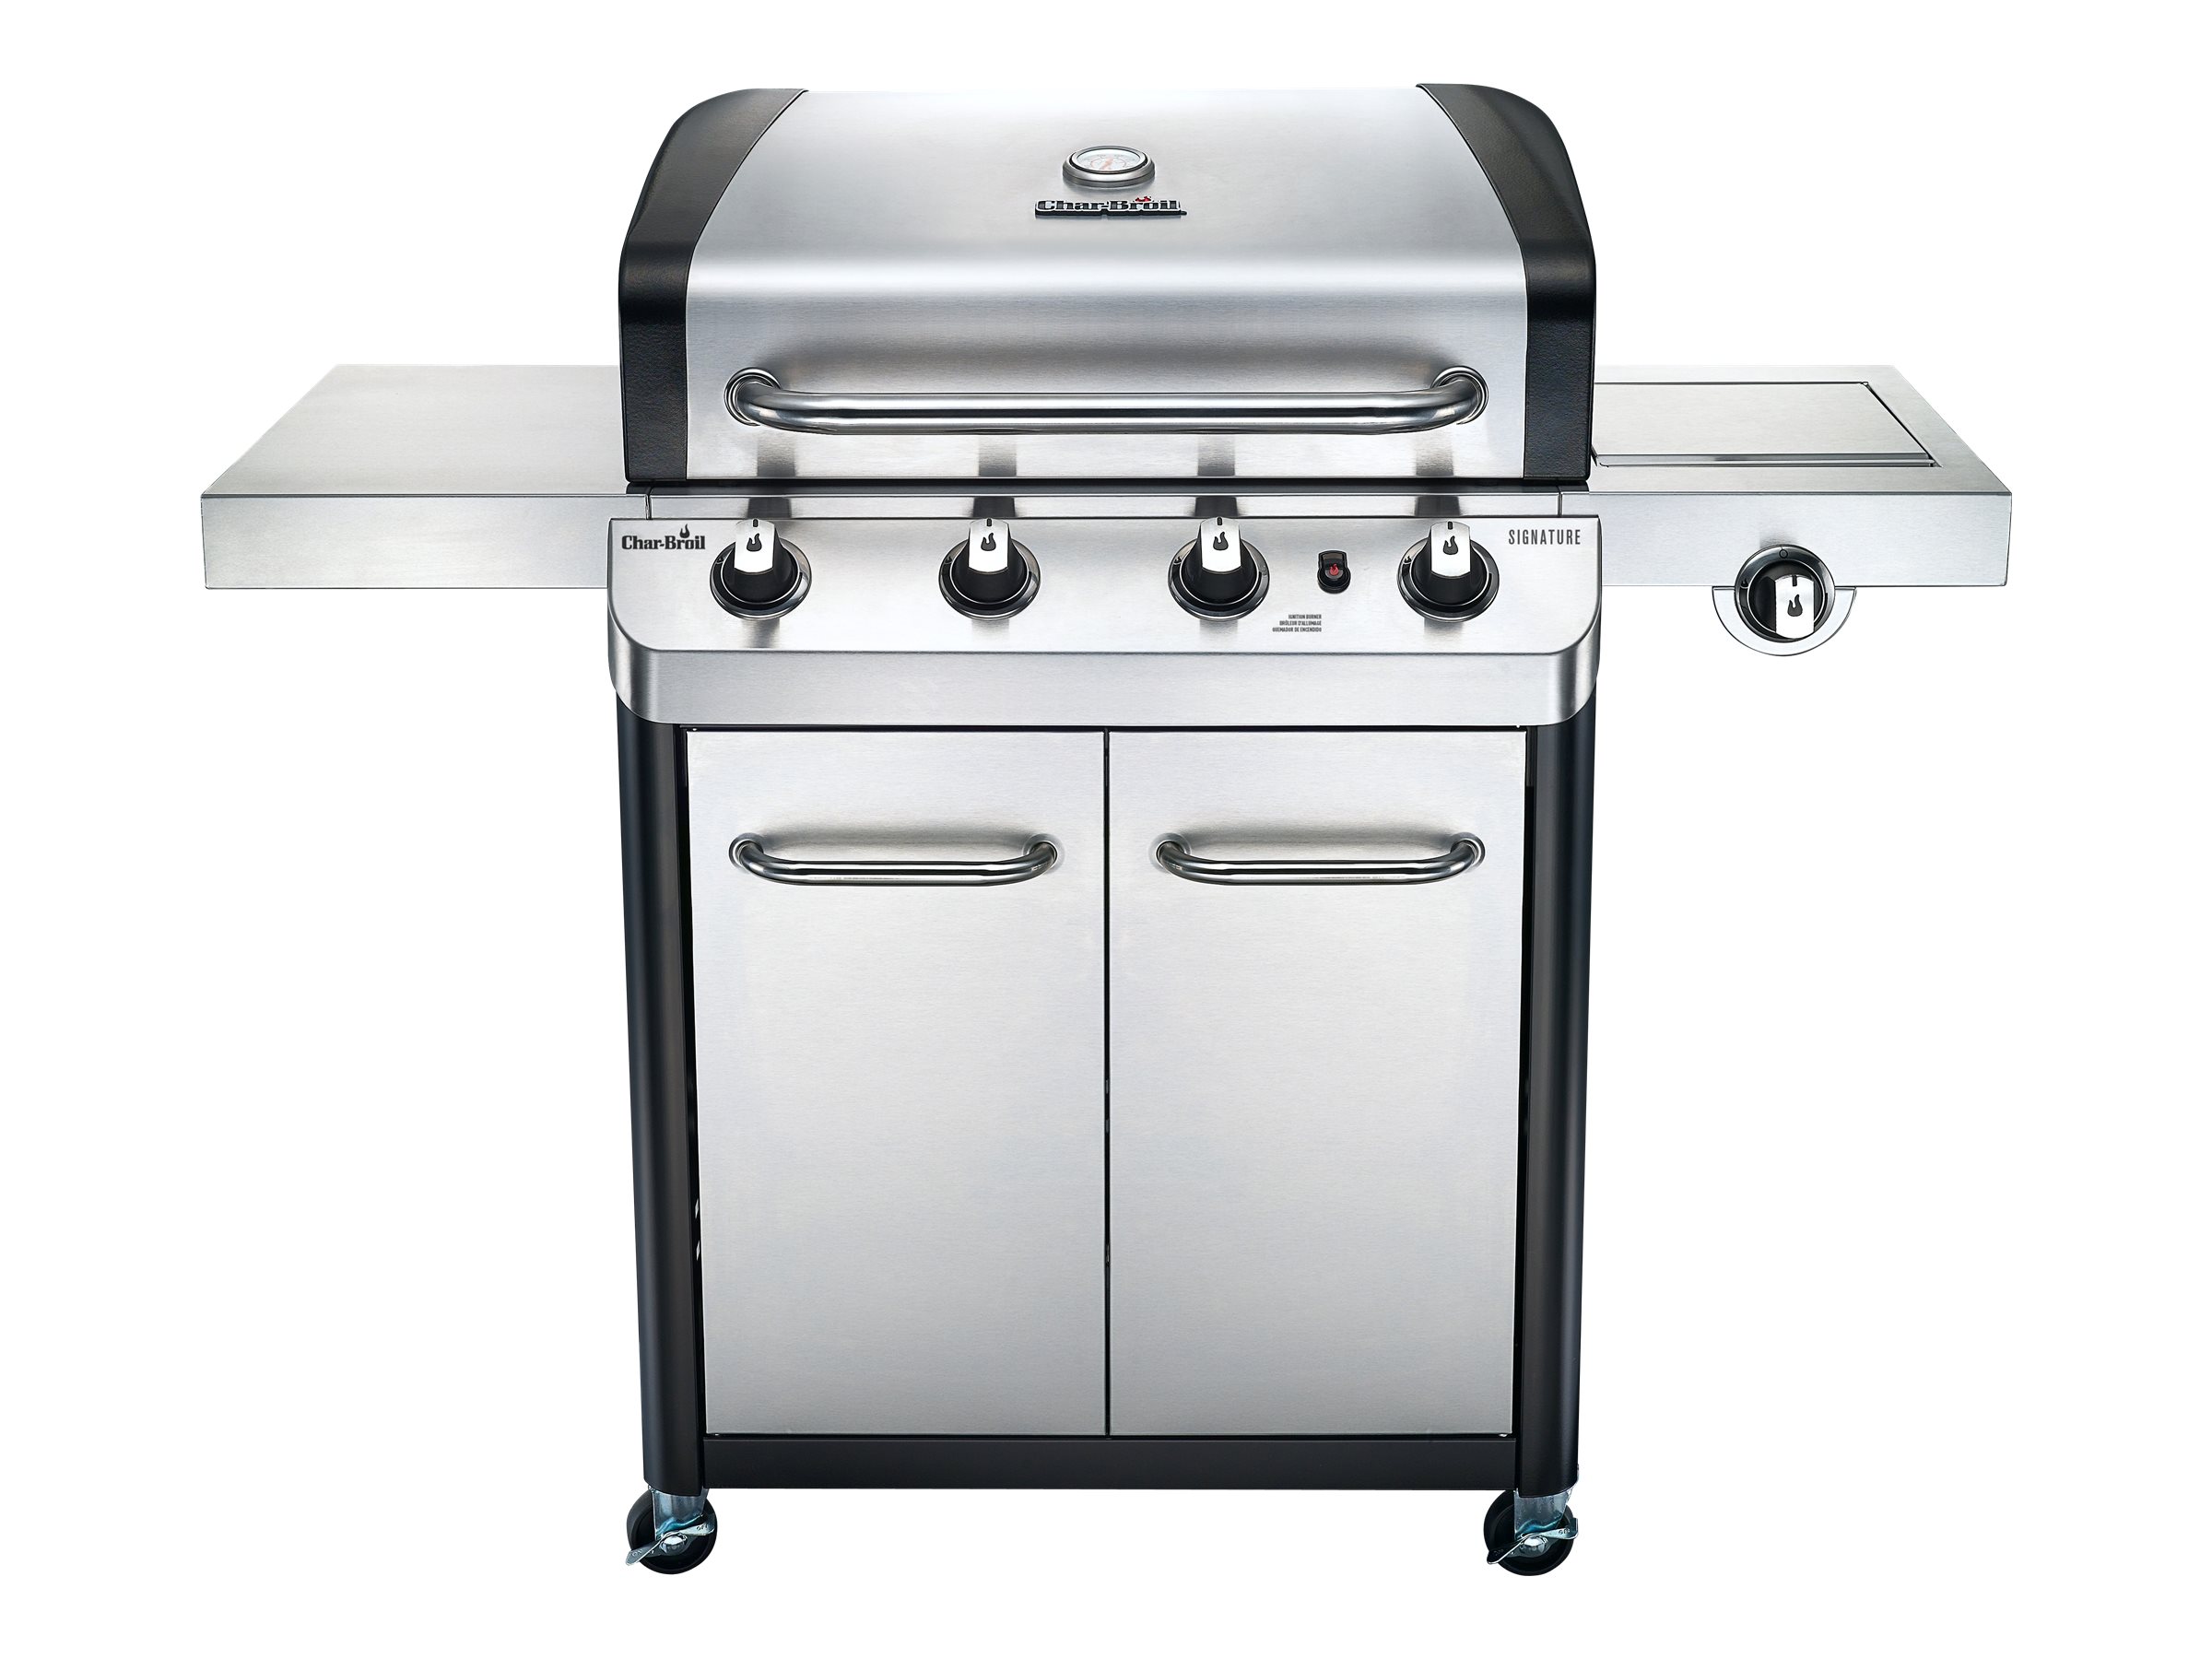 Char-Broil Signature 4-Burner Gas Grill - image 2 of 11